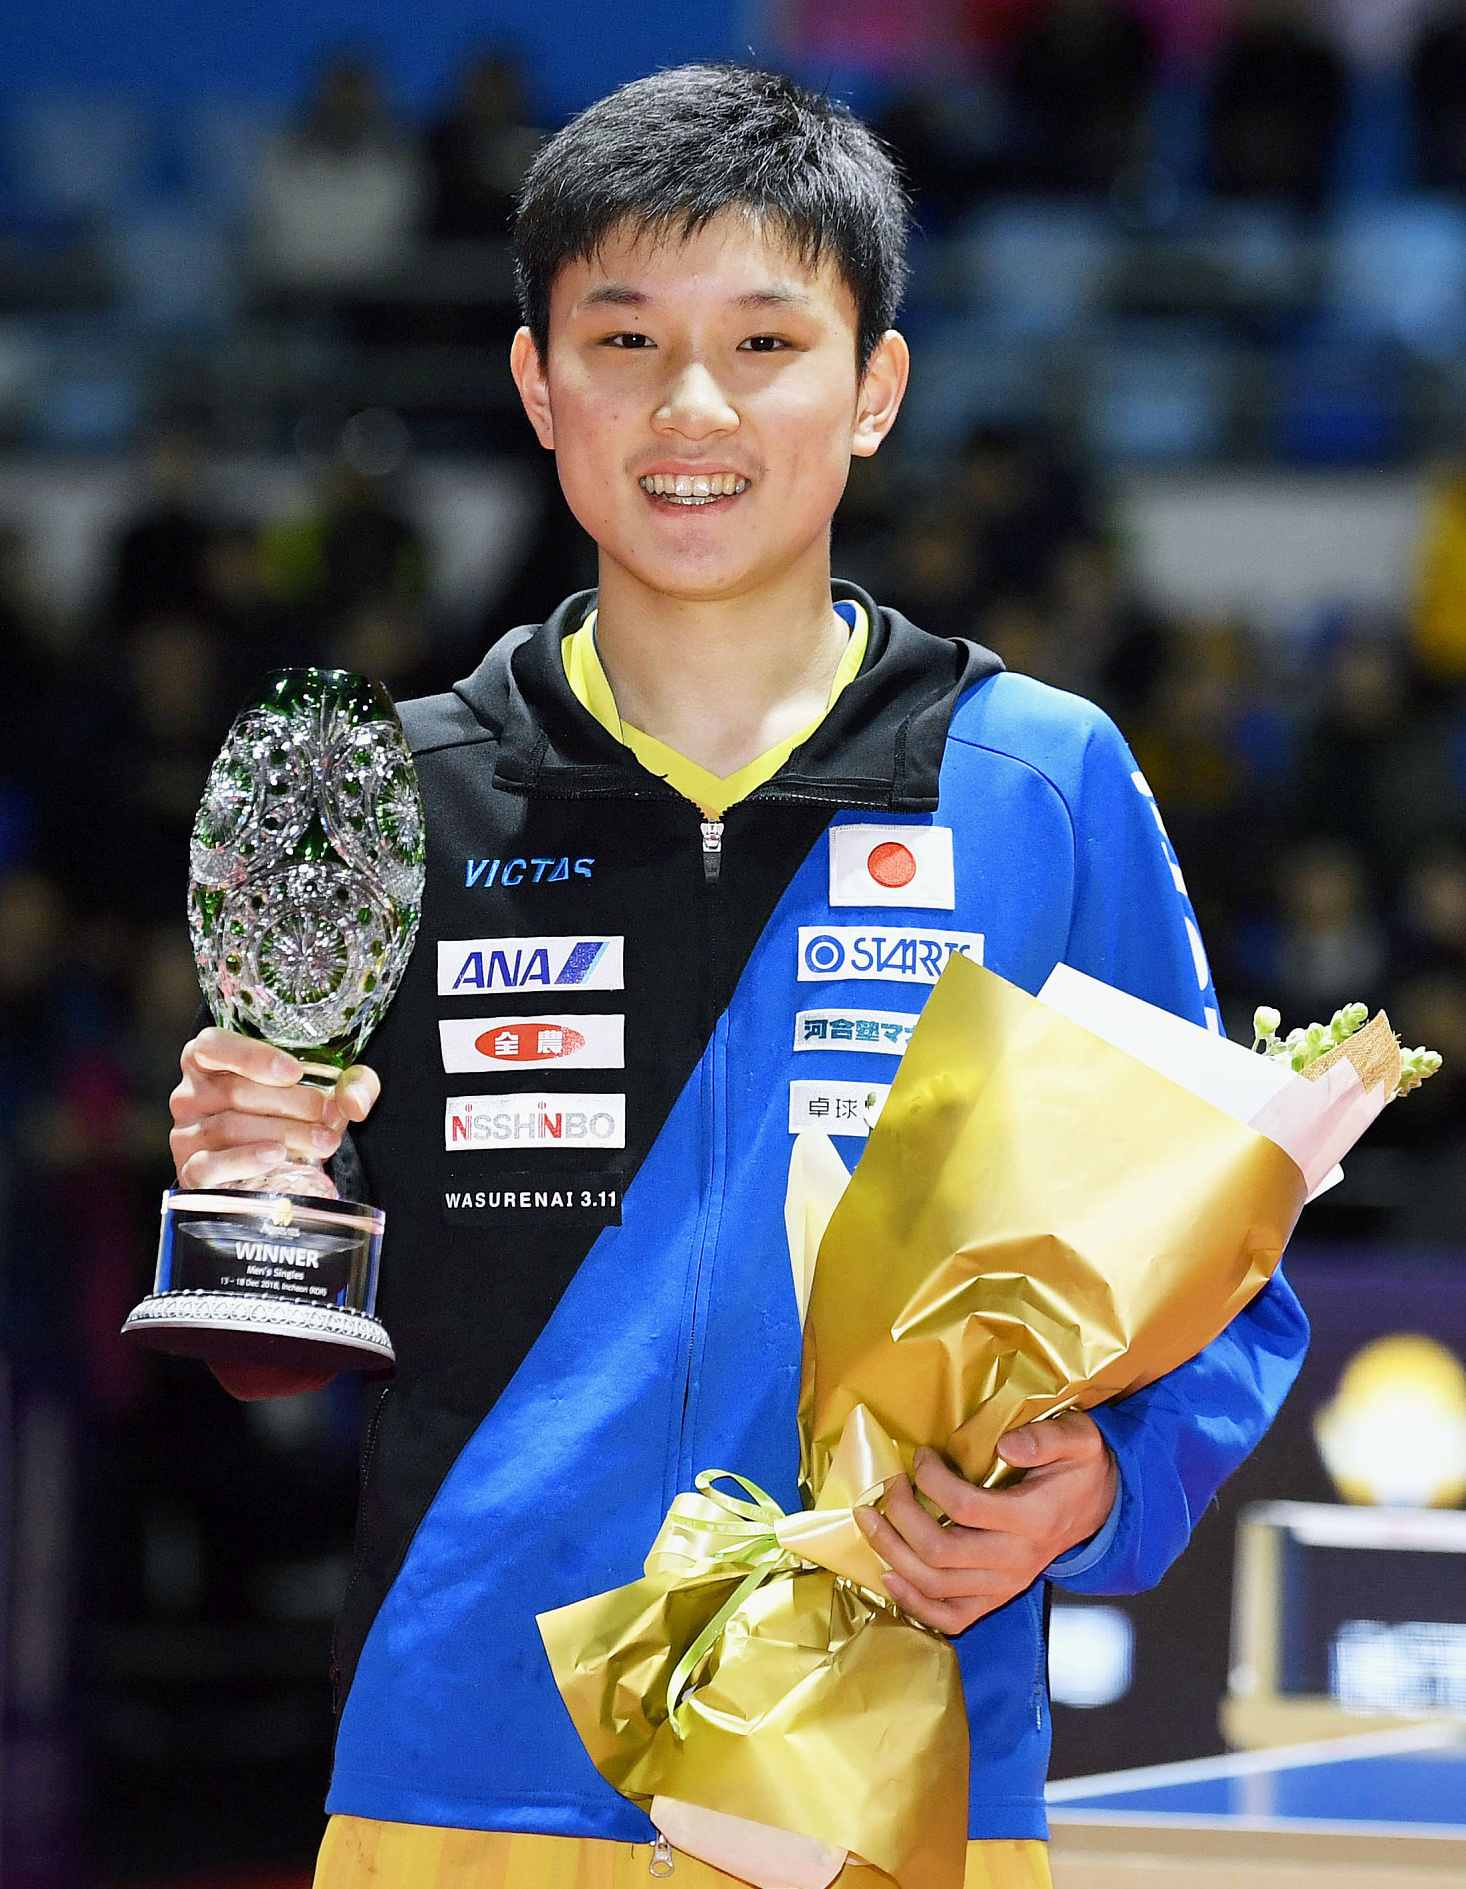 The 18-year old son of father (?) and mother(?) Tomokazu Harimoto in 2022 photo. Tomokazu Harimoto earned a  million dollar salary - leaving the net worth at  million in 2022